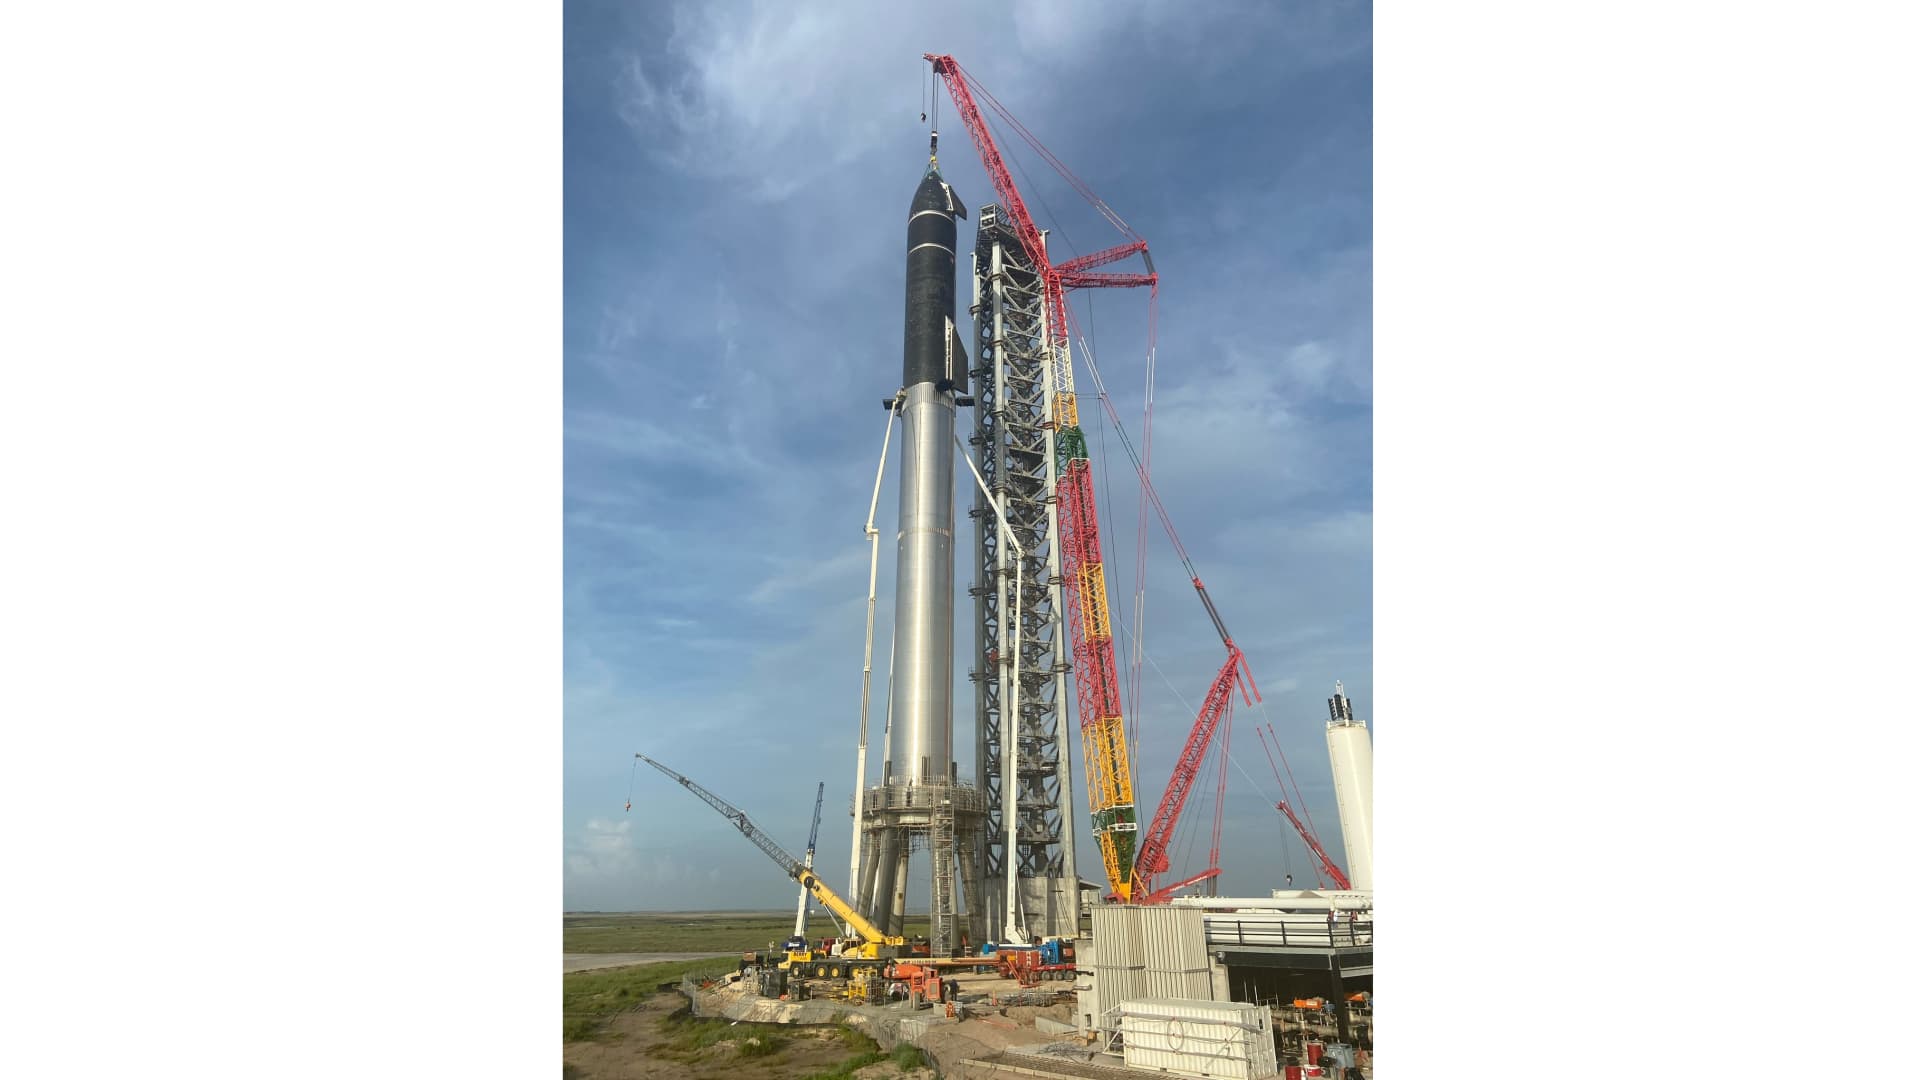 SpaceX stacks Starship prototype 20 on top of Super Heavy rocket Booster 4 on August 6, 2021.